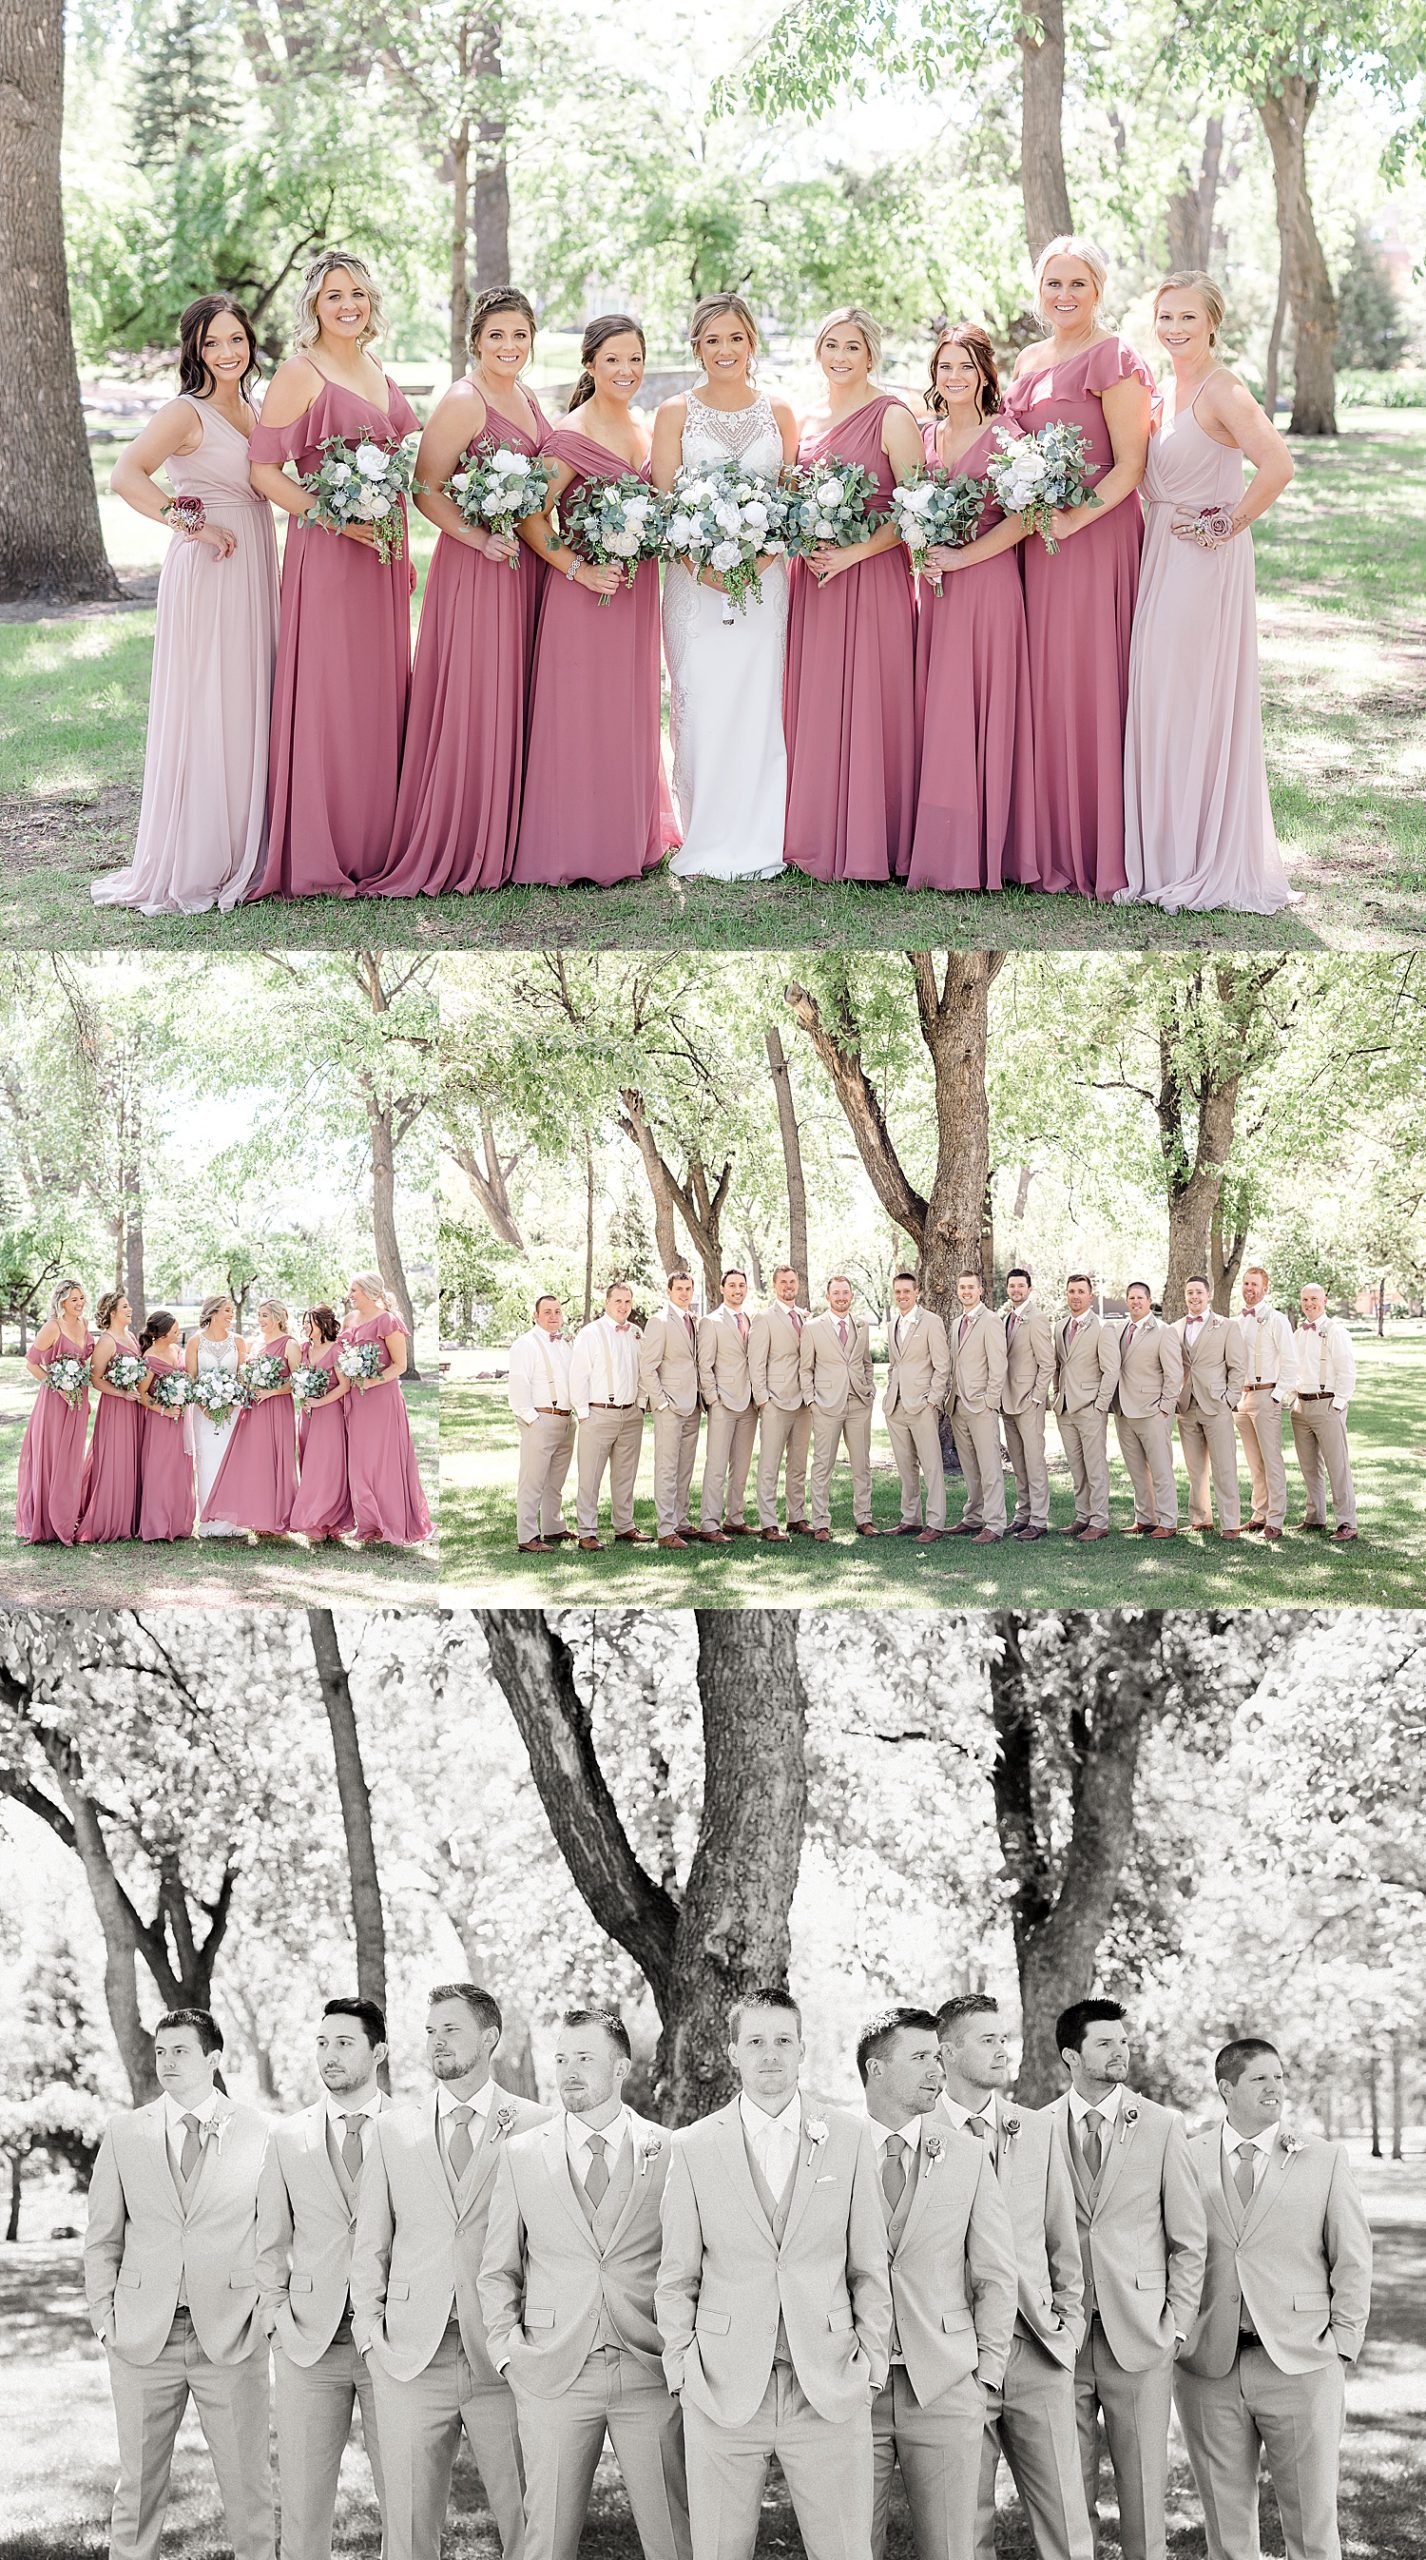 bridal party wearing light grey suits and blush pink dresses by Midwest photographer fernweh & Liebe